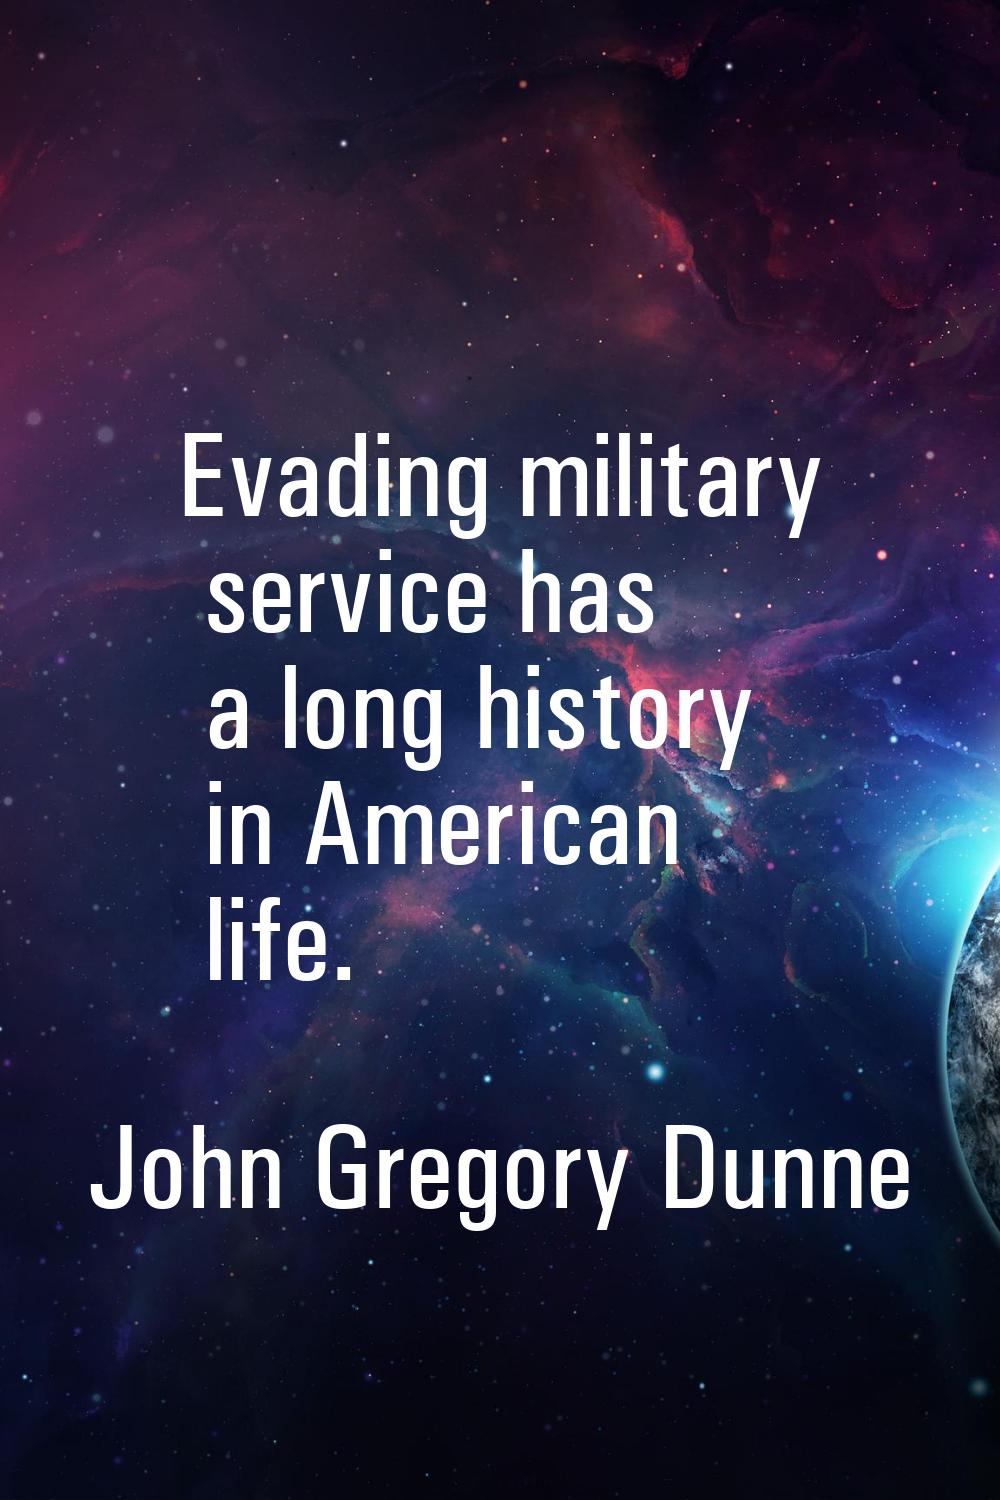 Evading military service has a long history in American life.